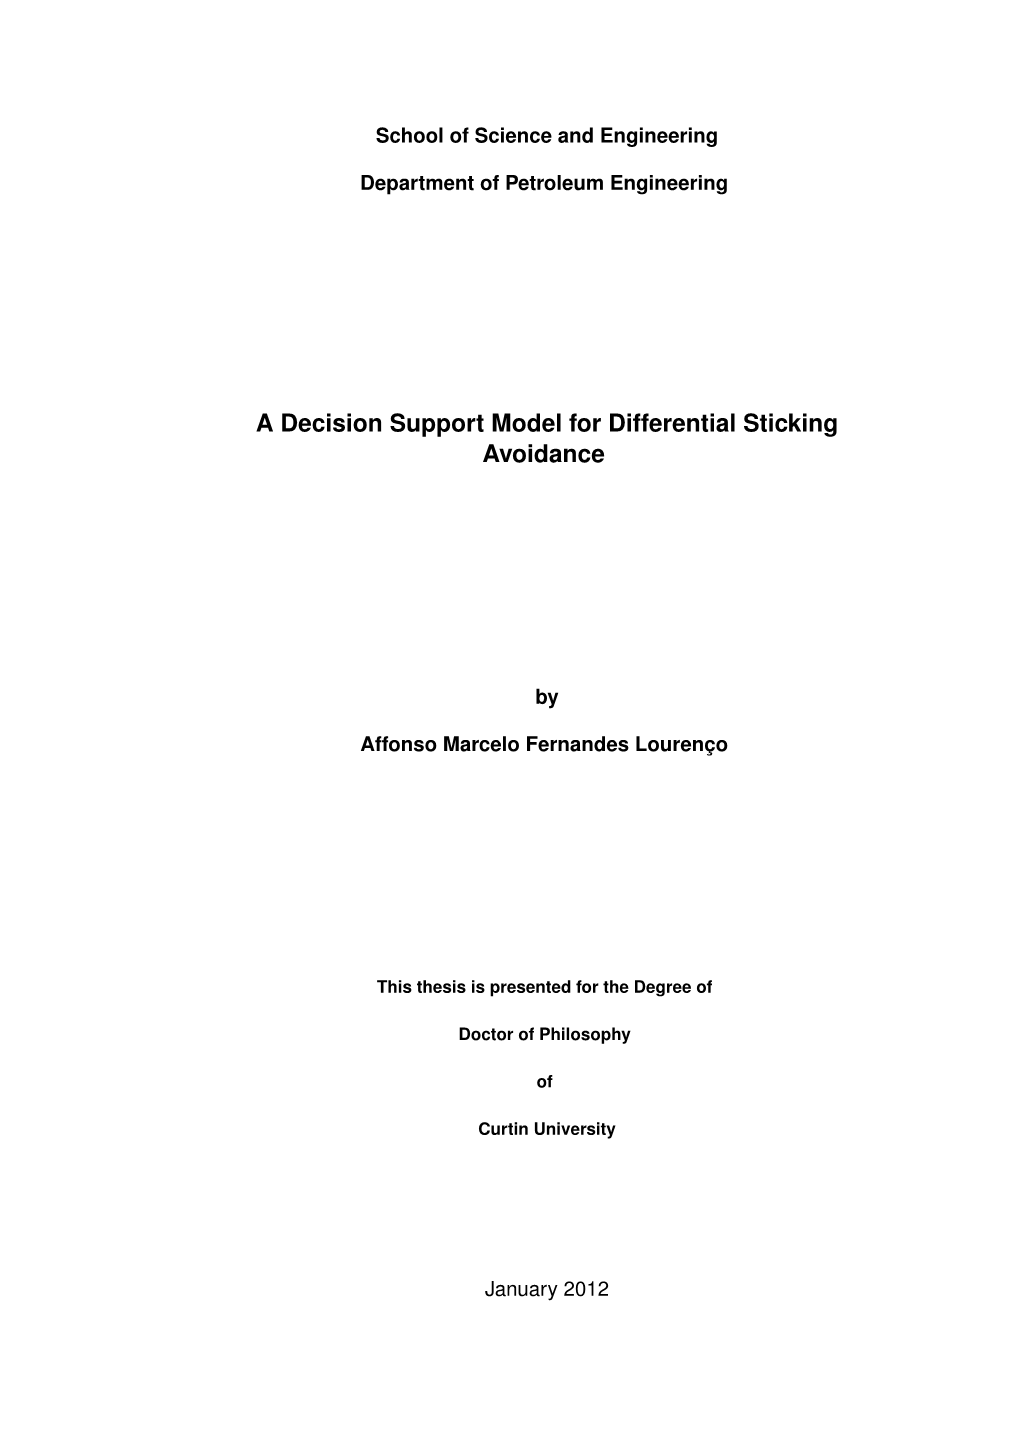 A Decision Support Model for Differential Sticking Avoidance